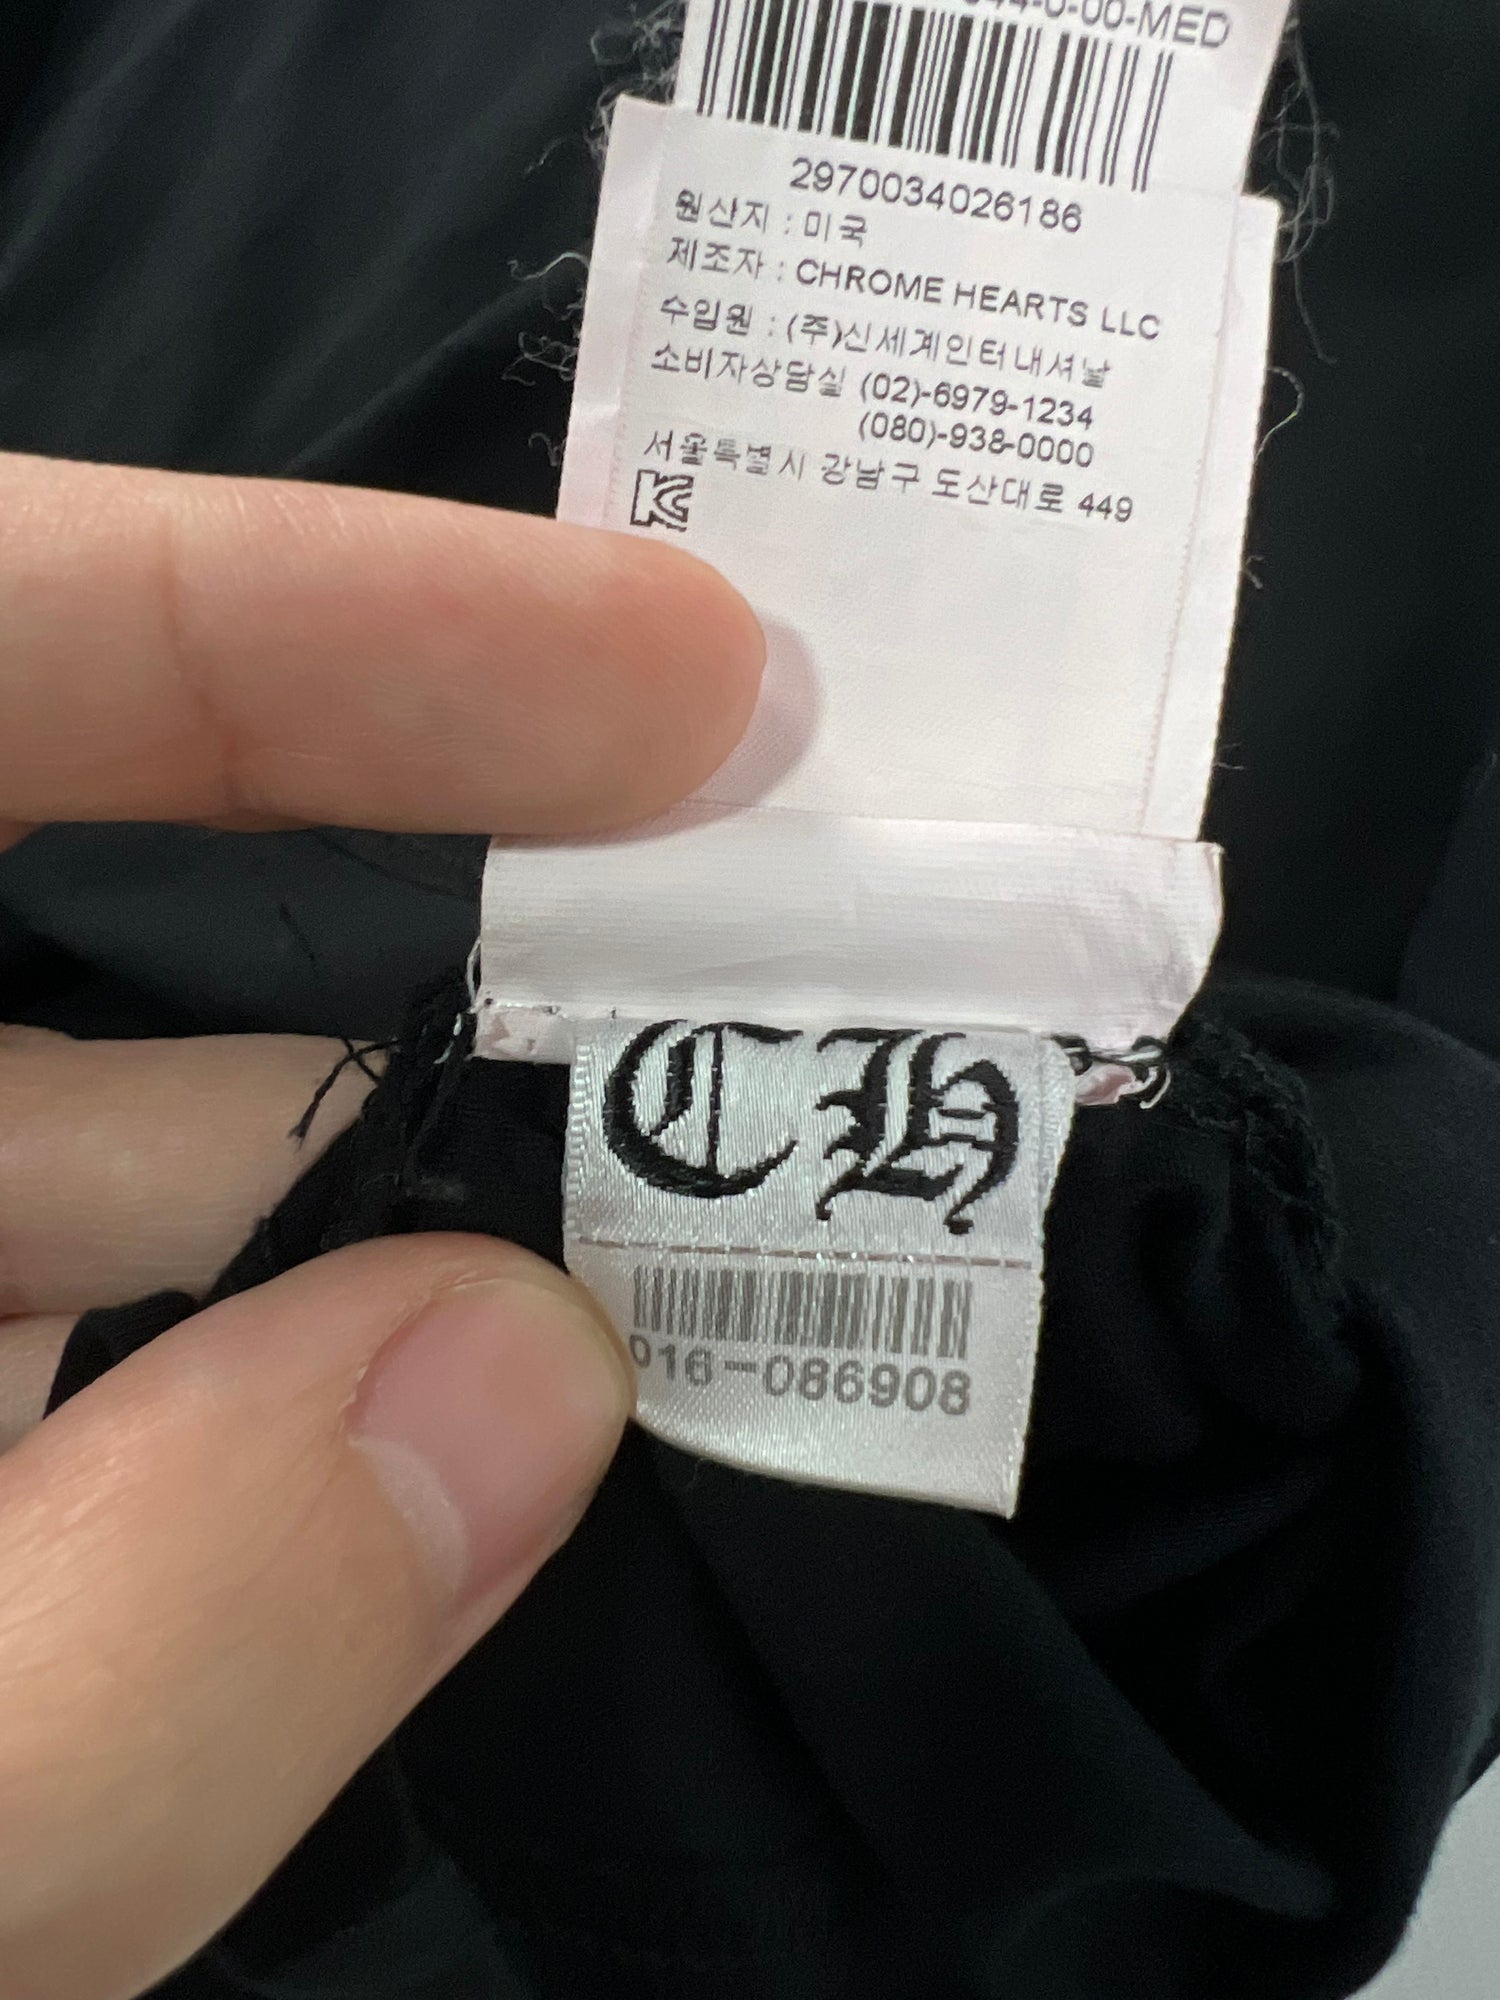 Chrome Hearts Archives - Legit Check By Ch